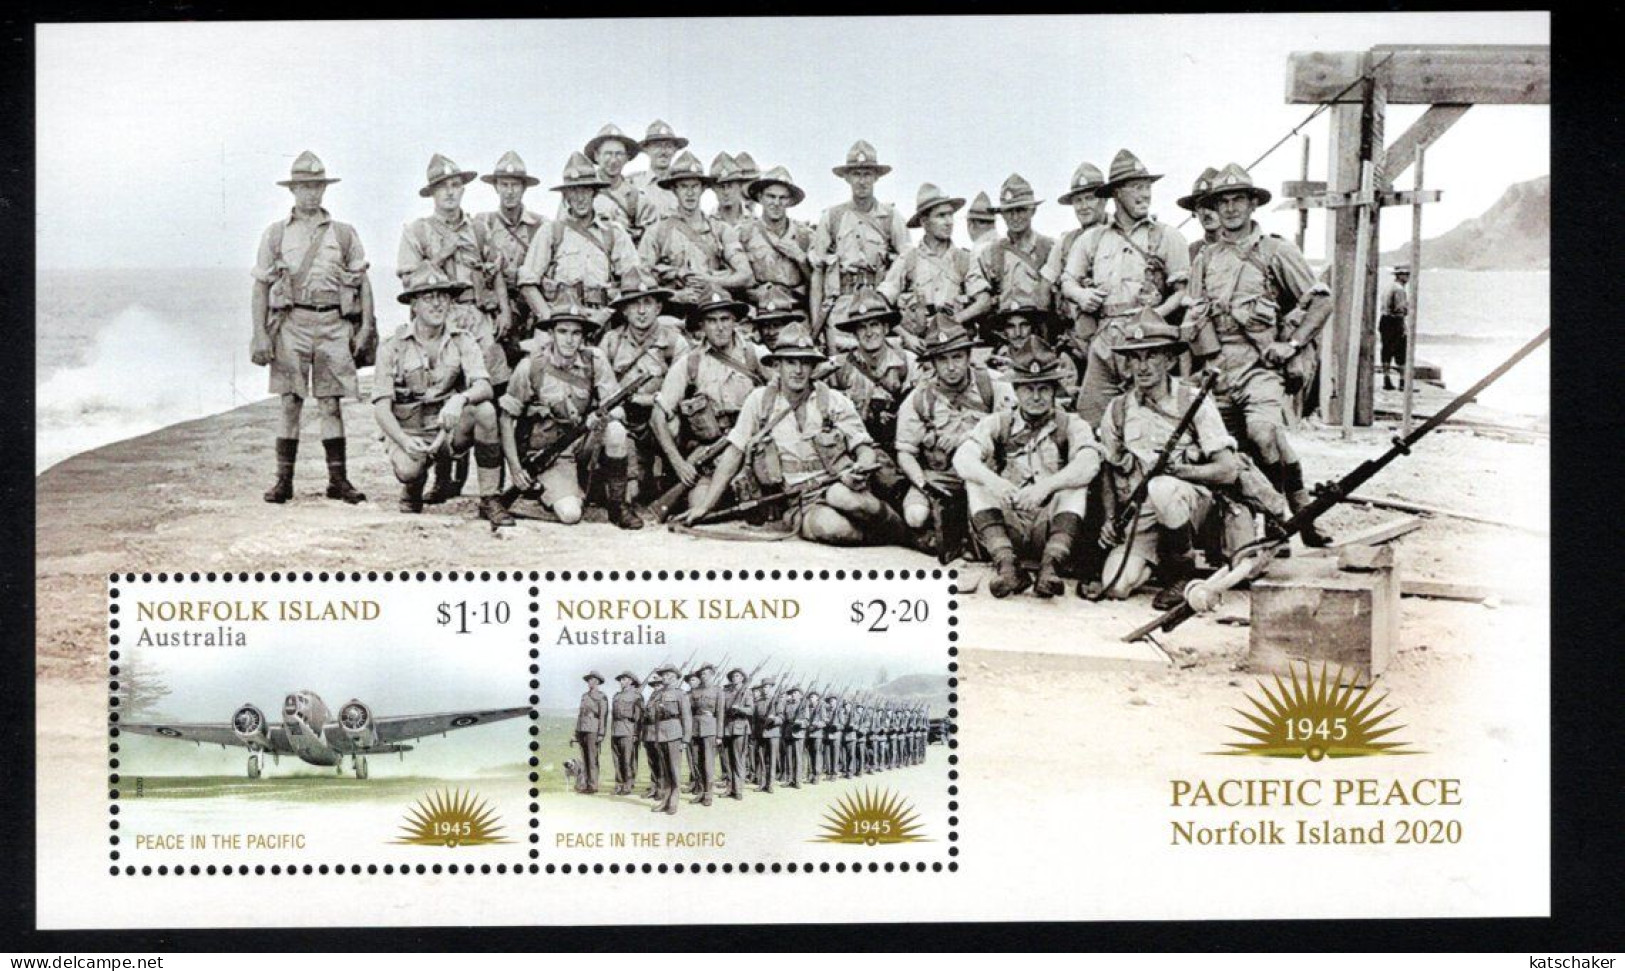 1960123312 2020 SCOTT 1161A (XX)  POSTFRIS MINT NEVER HINGED - END OF WORLD WAR II IN THE PACIFIC - 75TH ANNIV - Norfolk Island